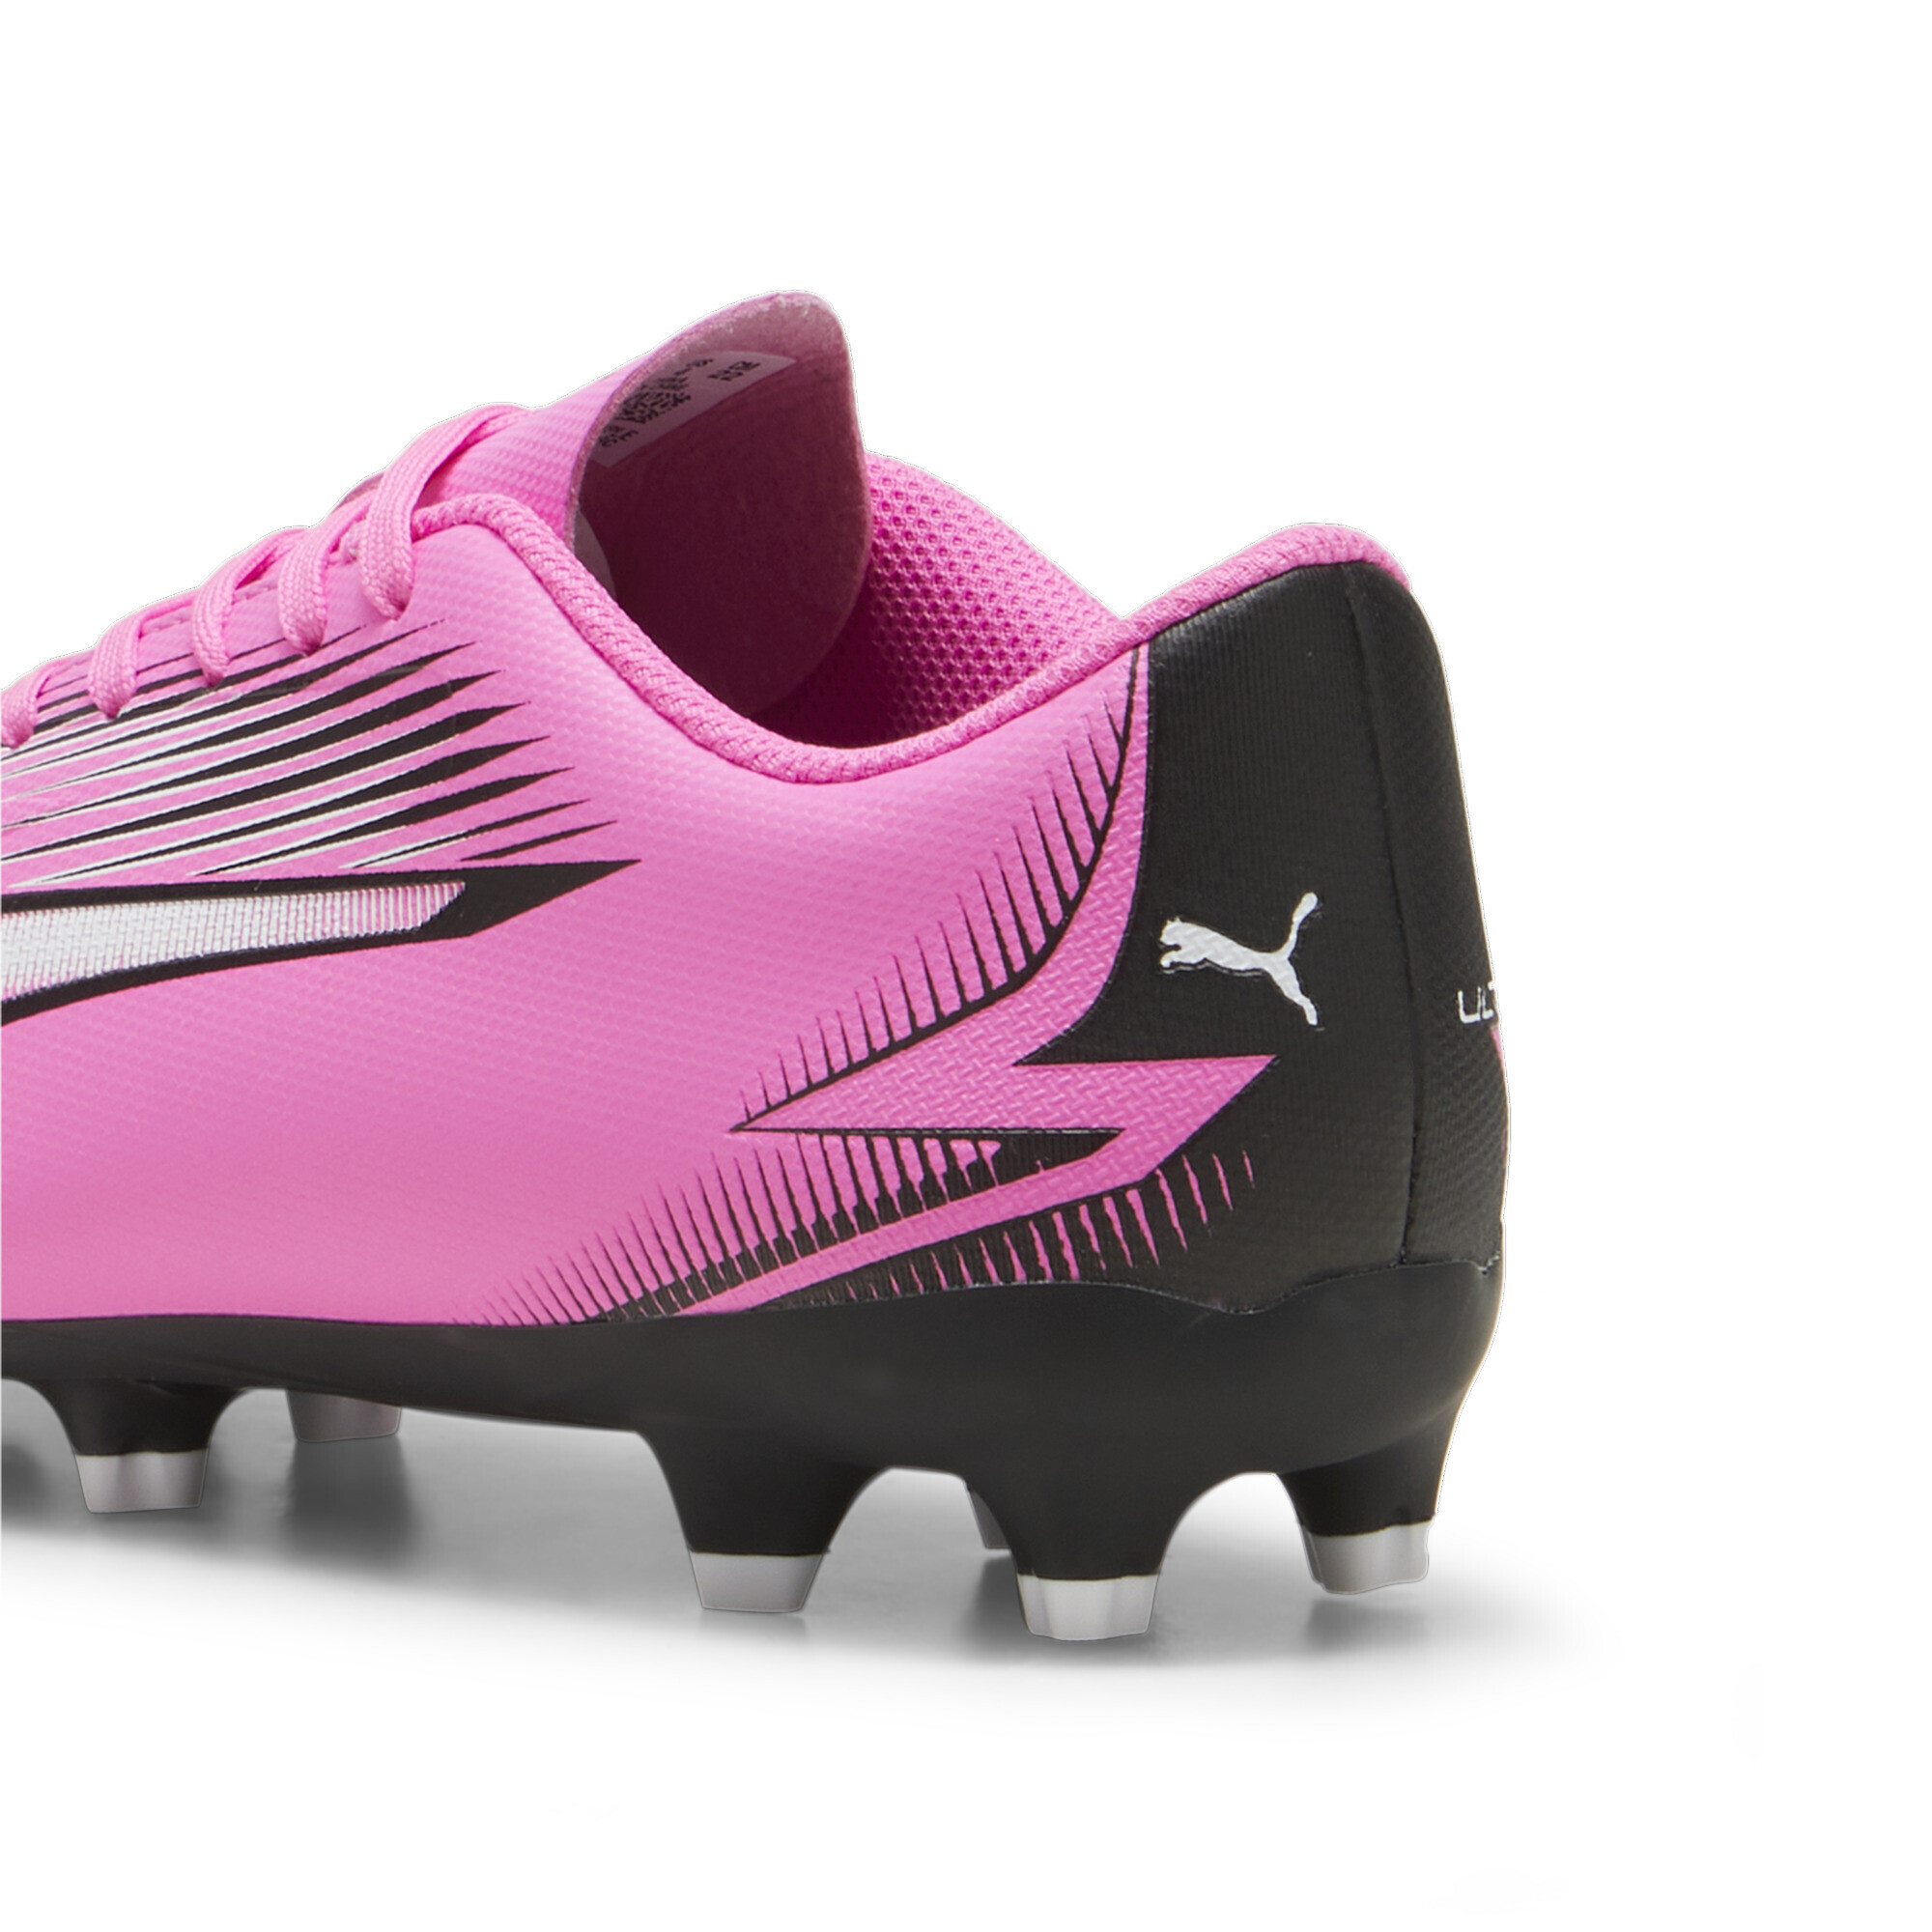 PUMA ULTRA PLAY FG/AG Youth Football Boots In Pink, Size EU 37.5